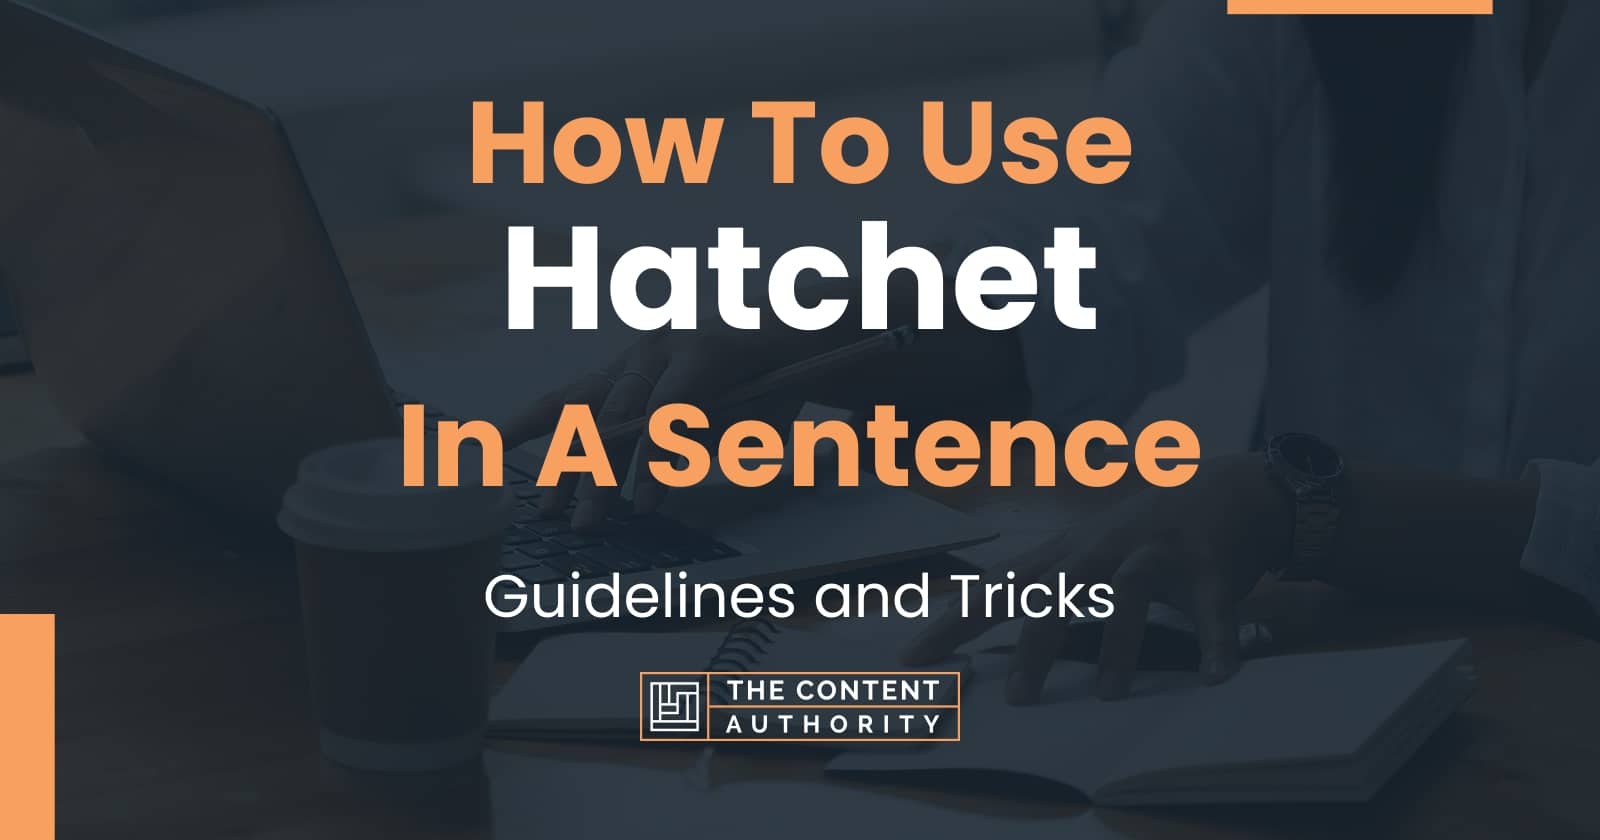 how-to-use-hatchet-in-a-sentence-guidelines-and-tricks